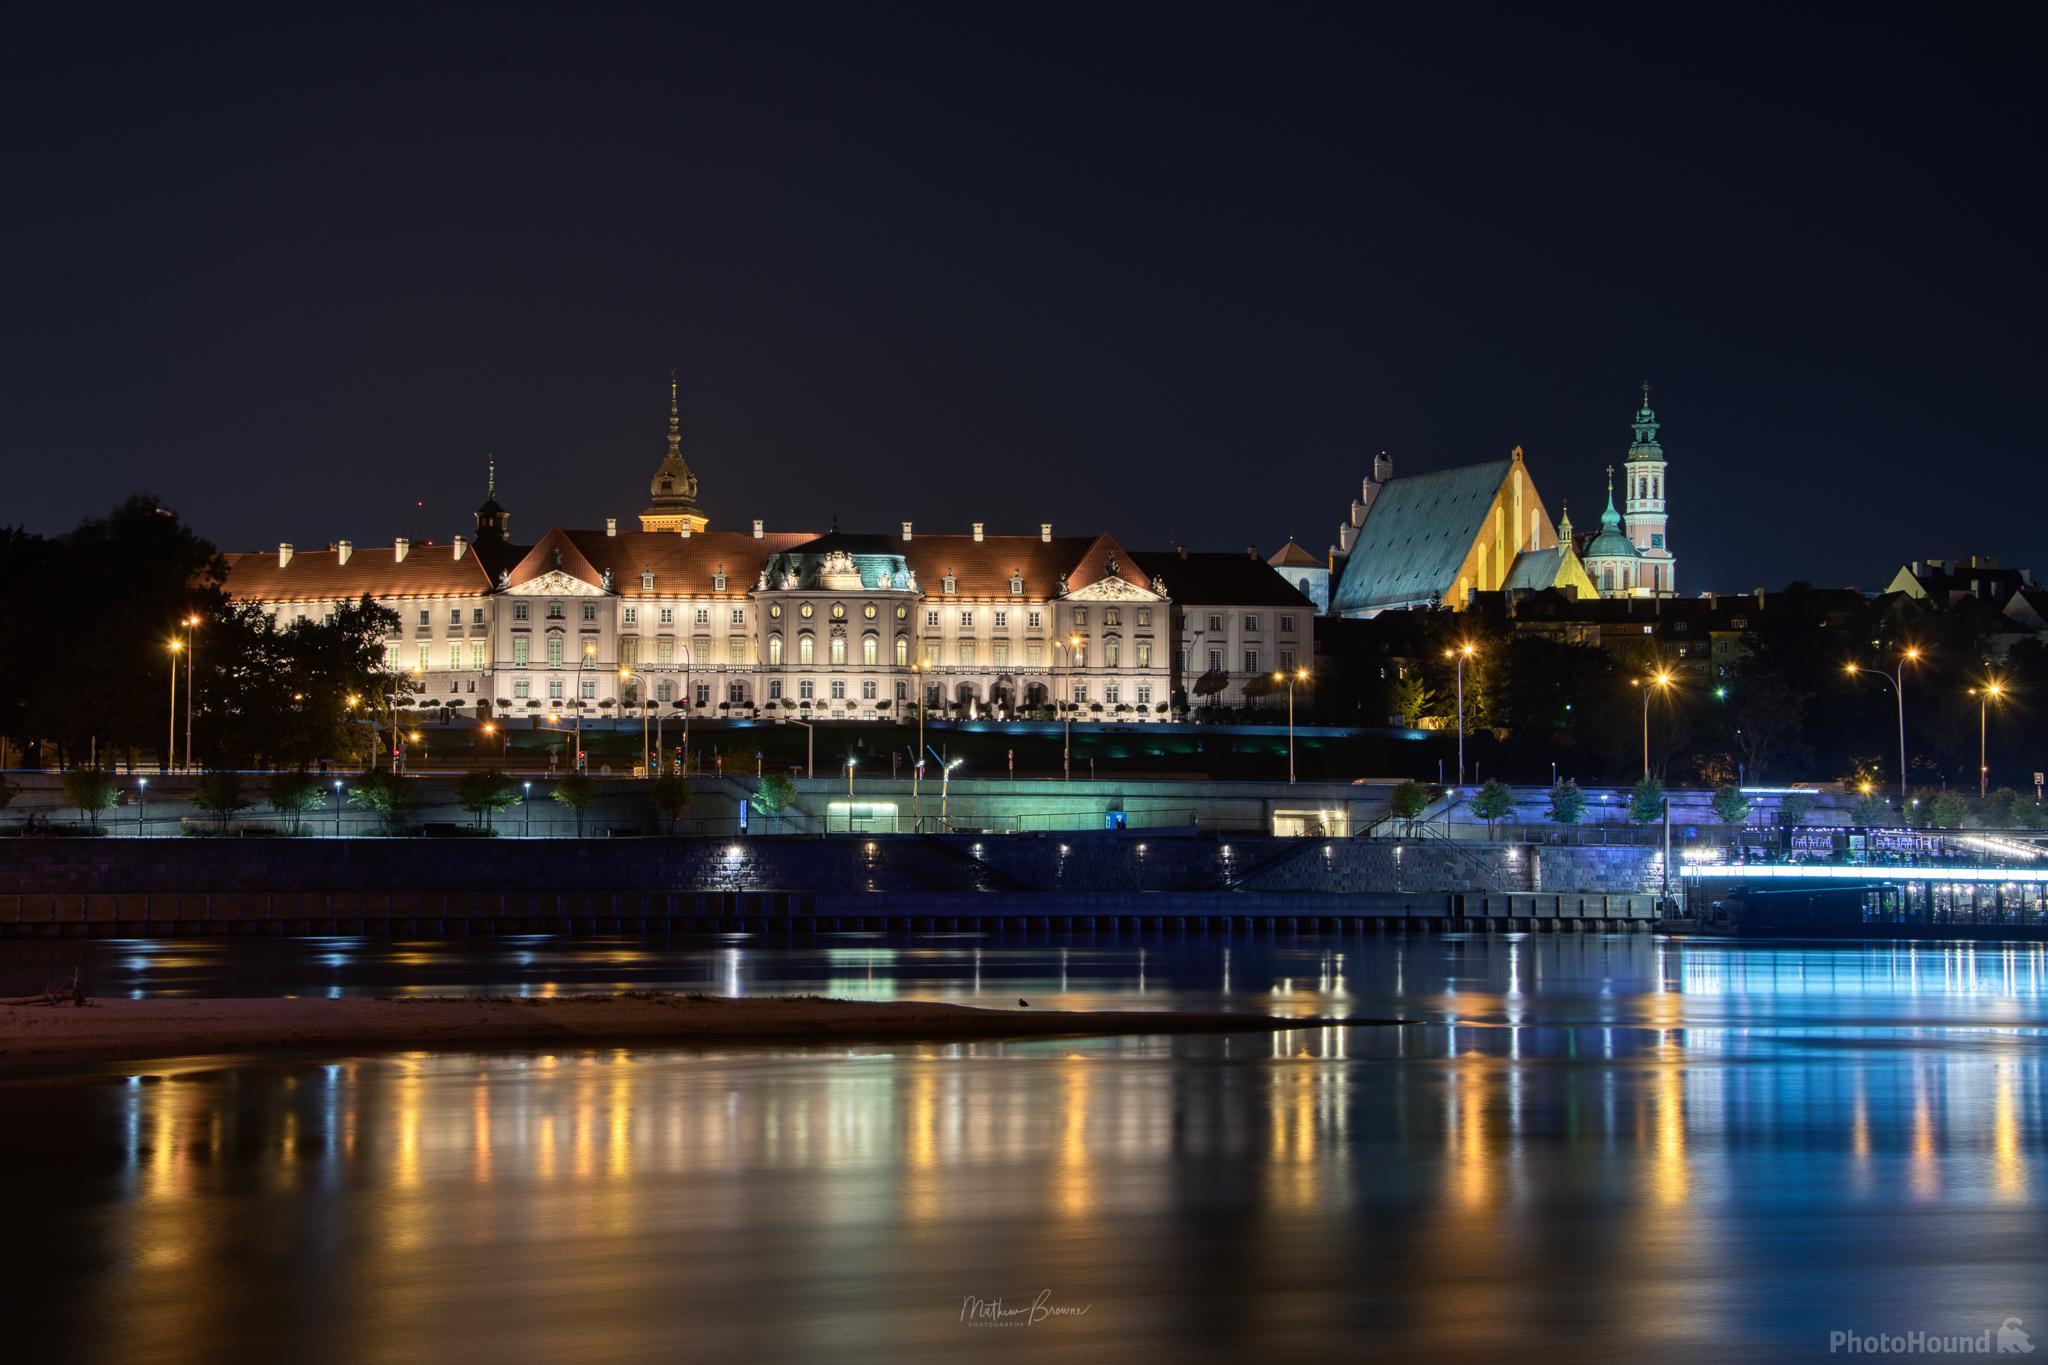 Image of Vistula River & Old Town Viewpoint by Mathew Browne